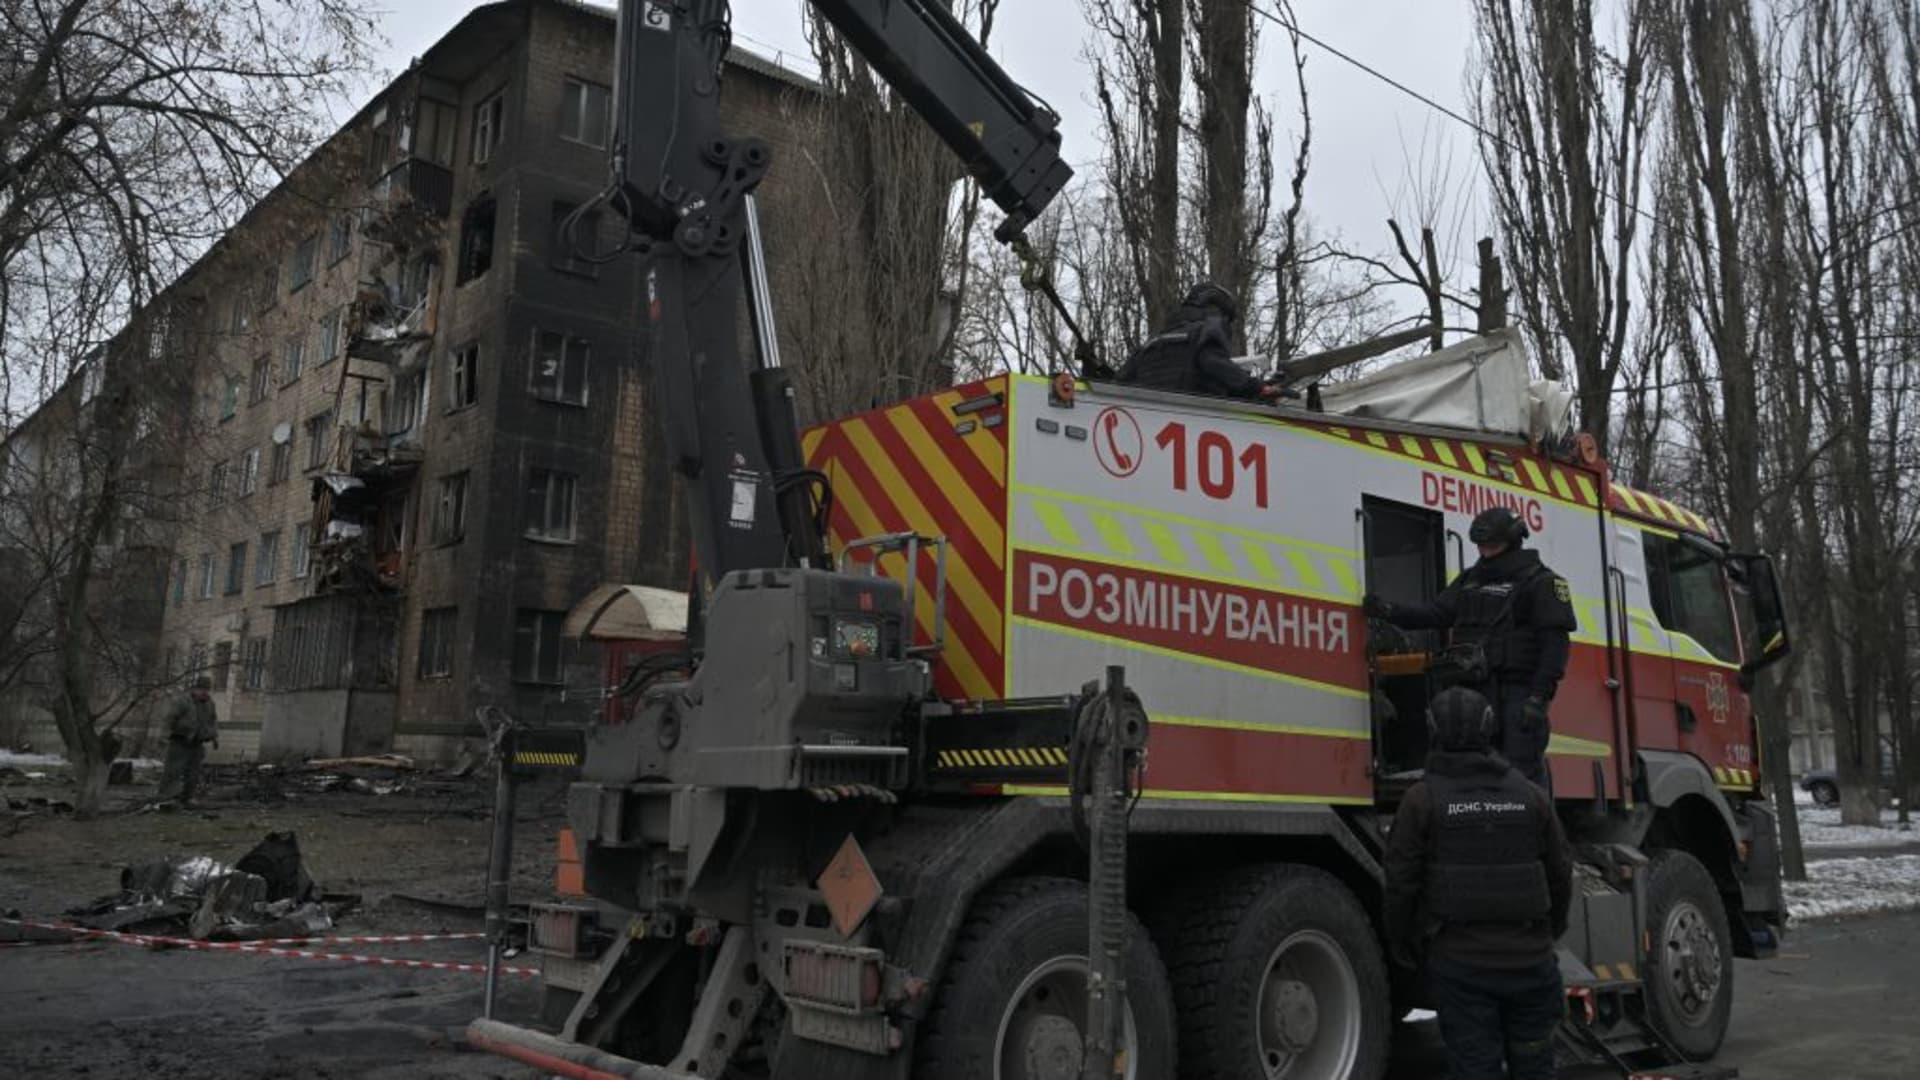 Ukrainian sappers load the remains of an undetonated rocket into a truck following a missile attack in Kyiv on January 23, 2024. Dozens of people were injured and least four killed after a wave of Russian missiles targeted Kyiv and other cities across Ukraine, setting residential buildings ablaze and reducing others to rubble. (Photo by Genya SAVILOV / AFP) (Photo by GENYA SAVILOV/AFP via Getty Images)